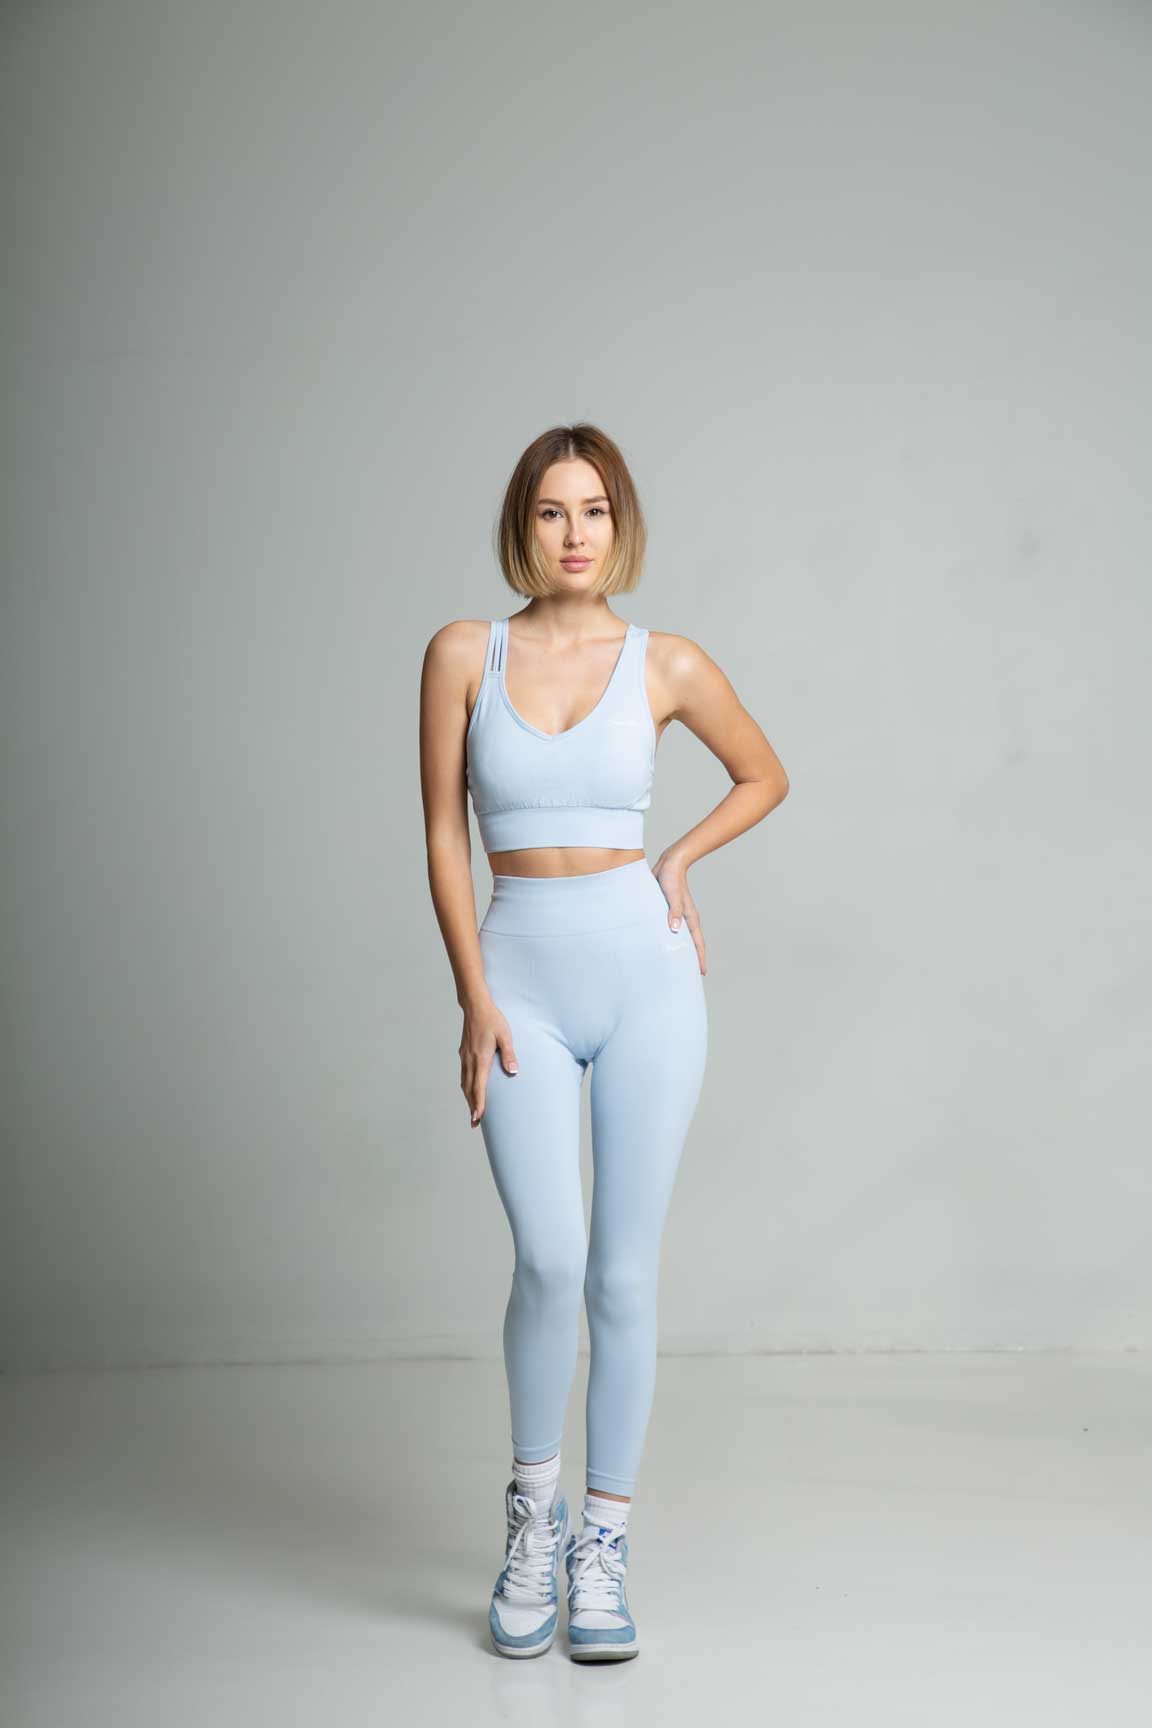 Shop Yoga clothing sets for women. Exclusively at BSA. Find our